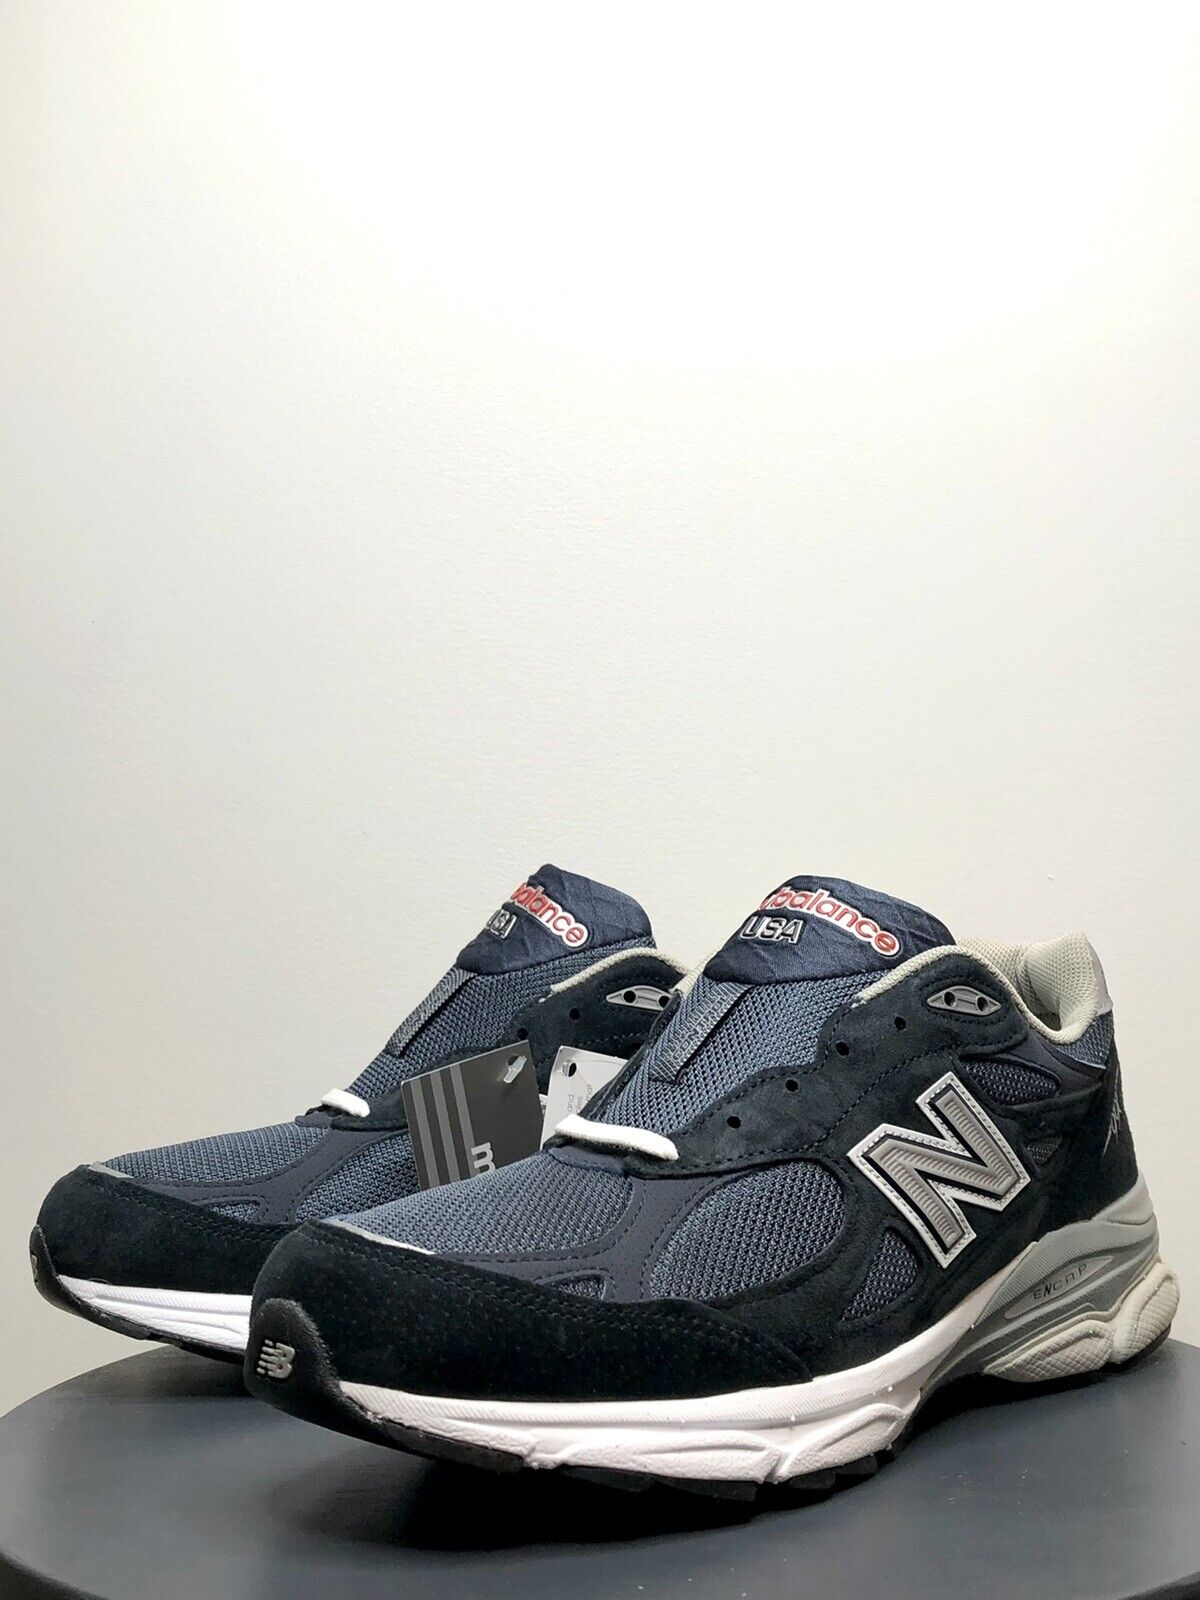 New Balance 990v3 Made in US (M990NB3 Navy) - Size 10 D